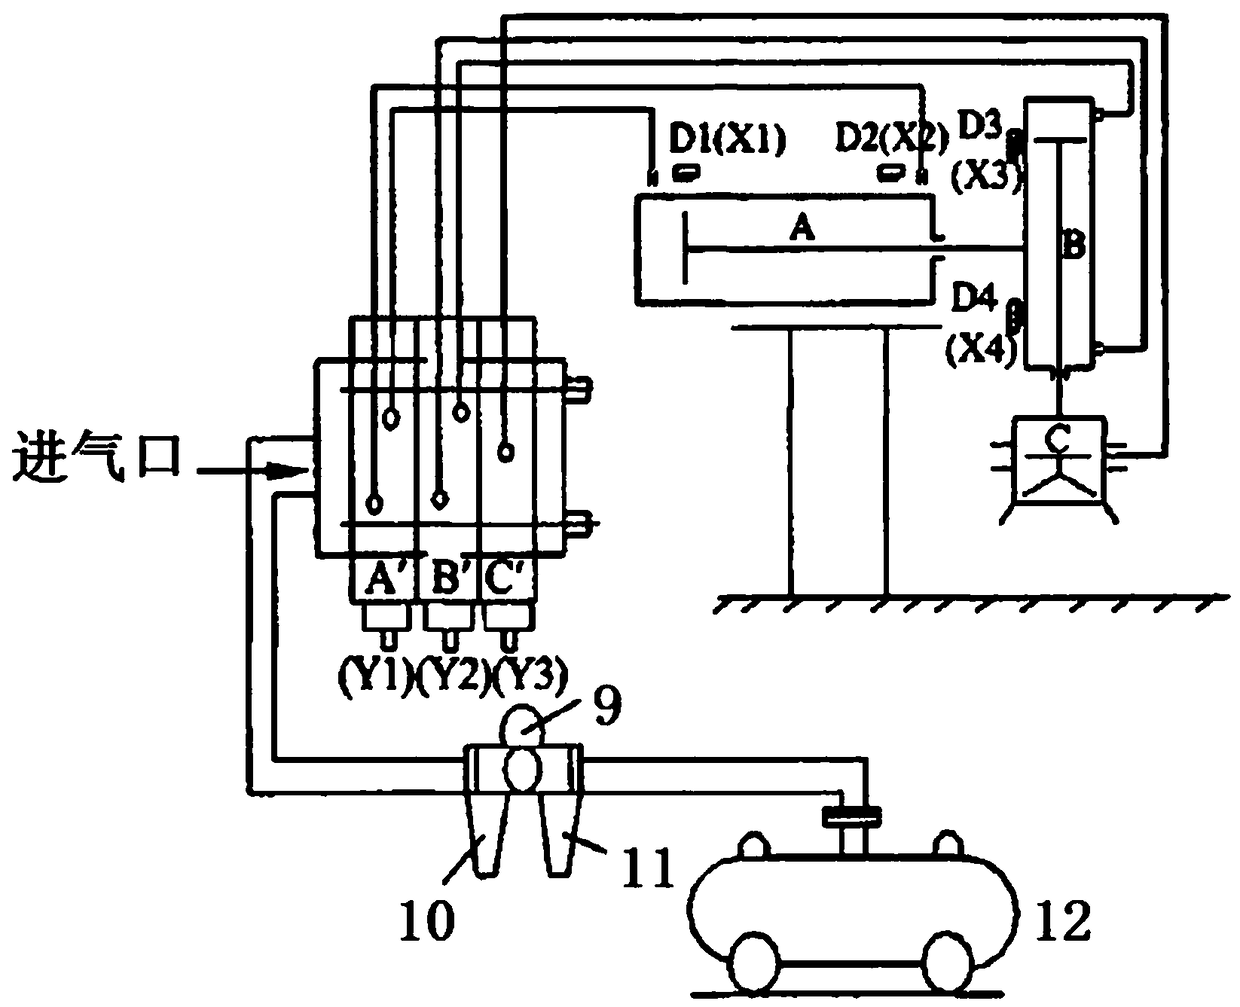 Weight counterbalance control system of automatic packaging production line for cathode copper plates